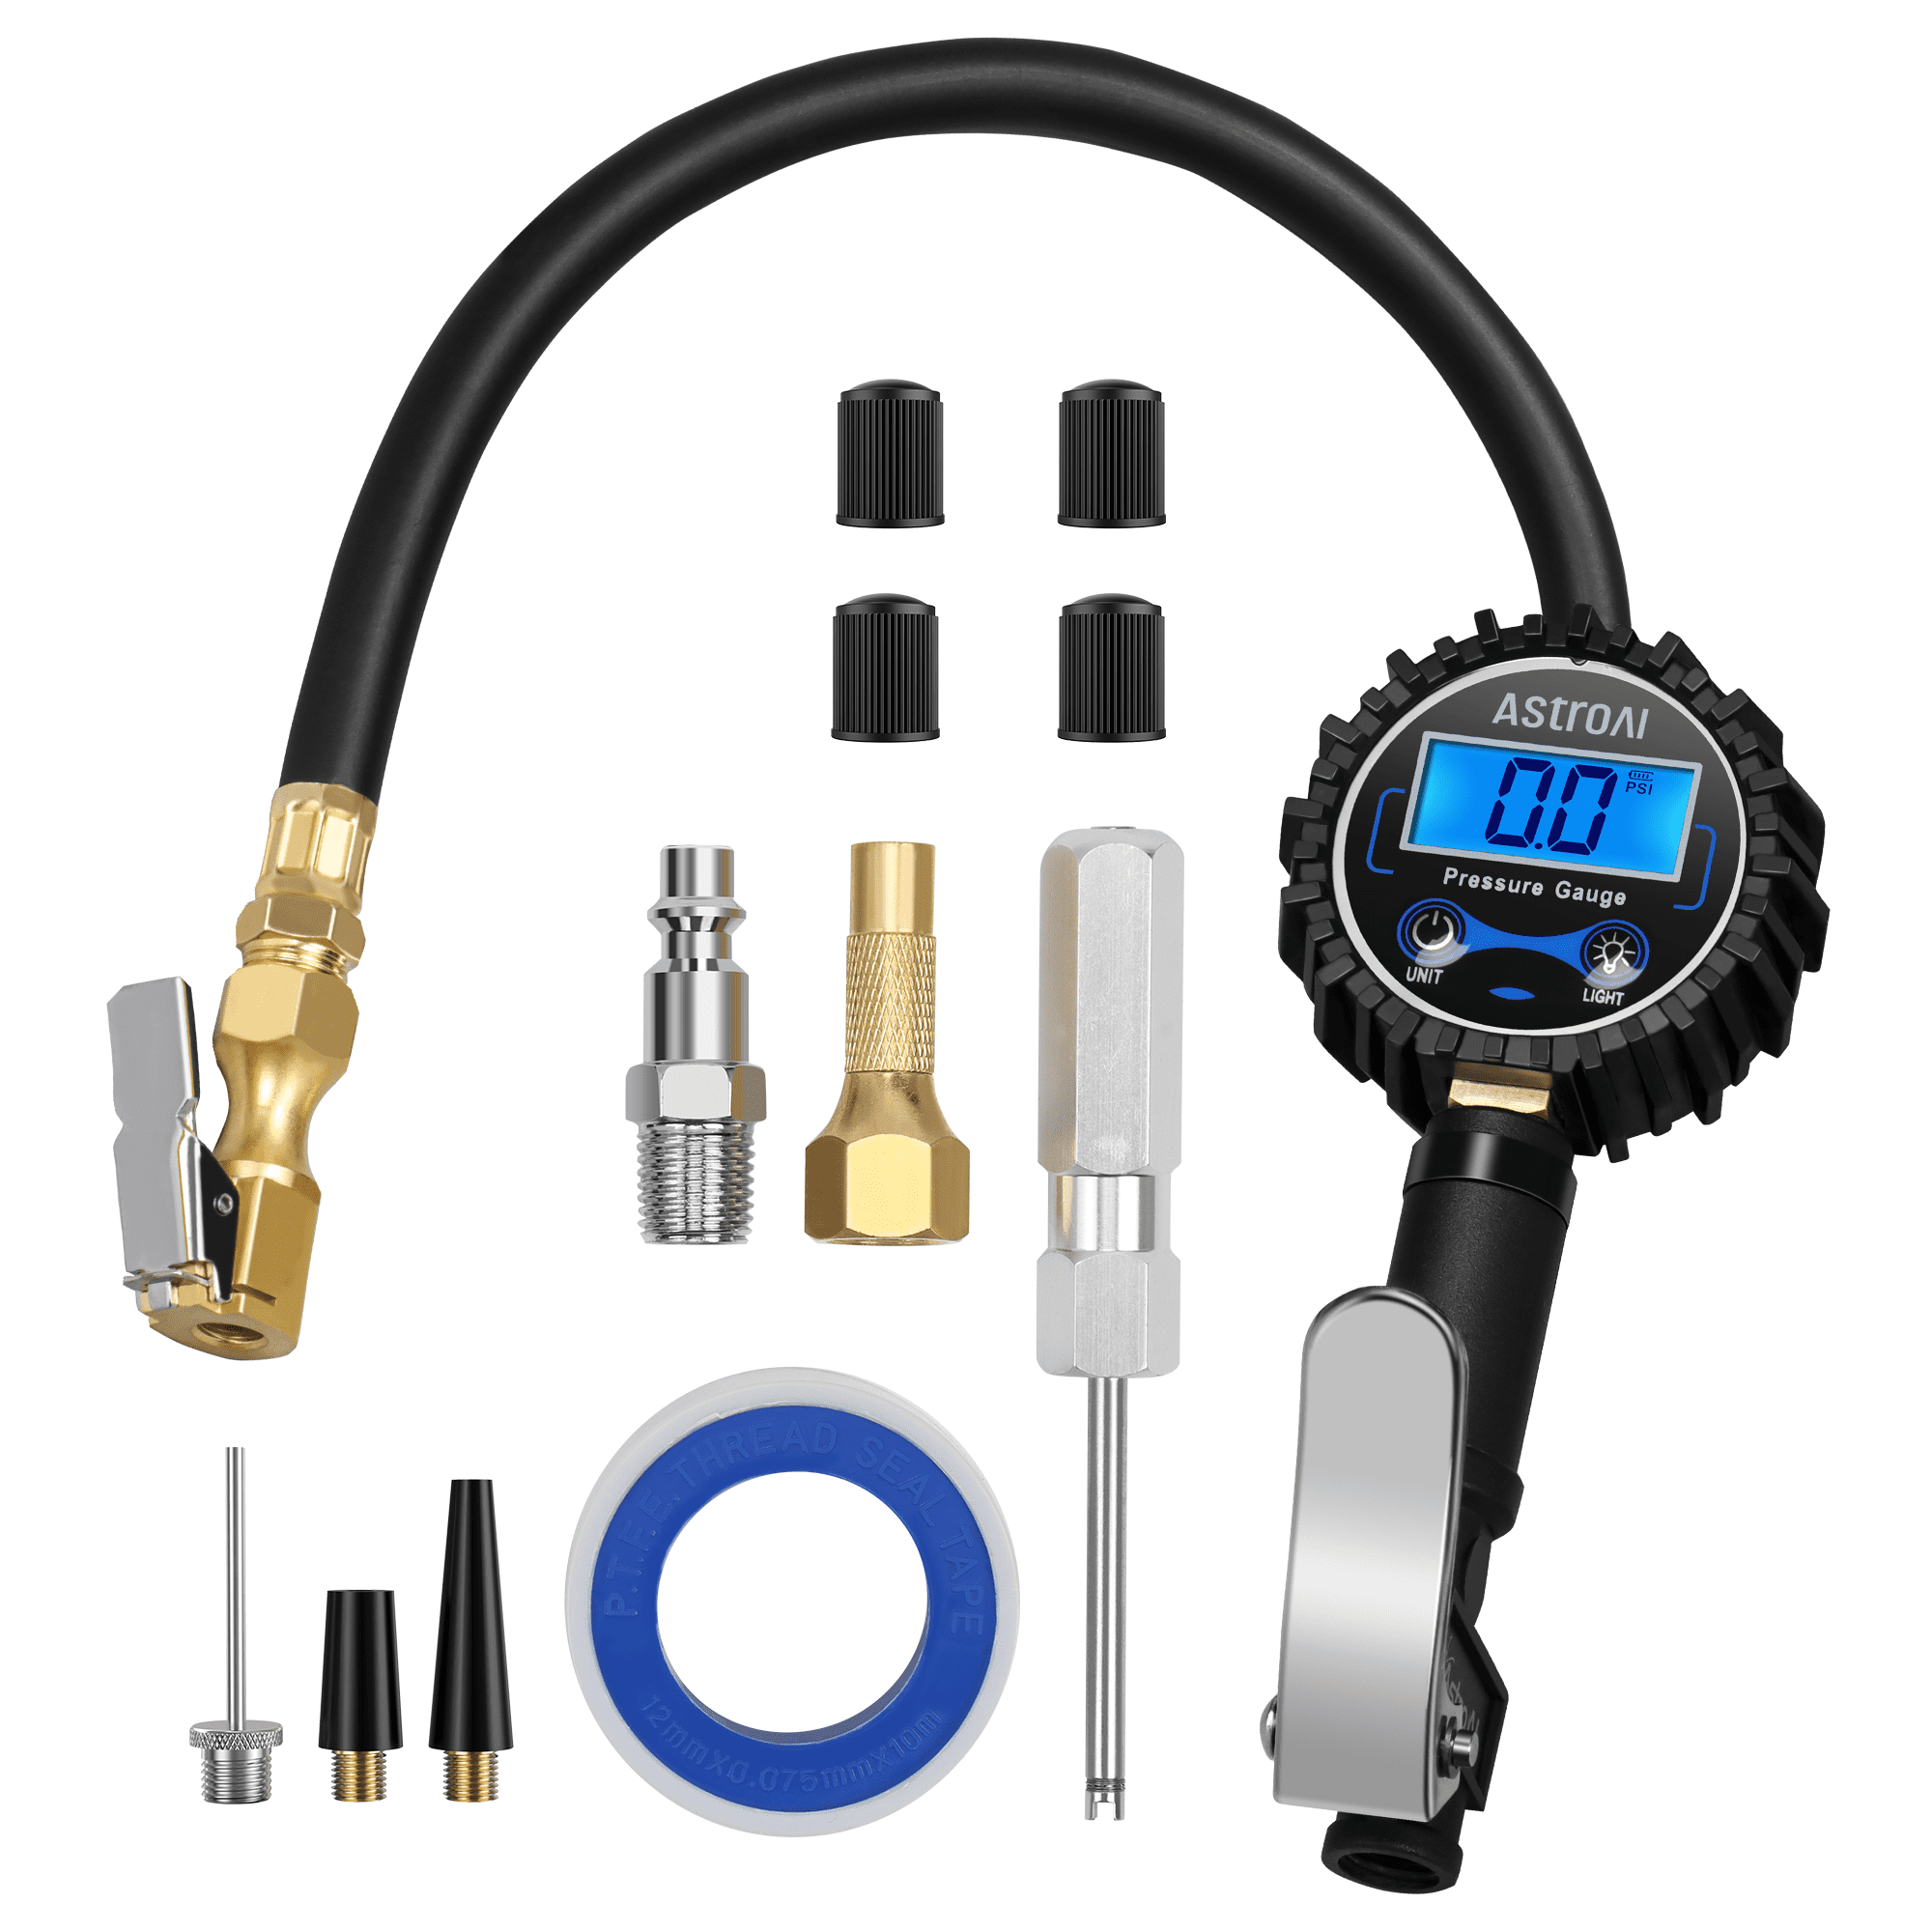 0-250 PSI Digital Tire Inflator with Easy to Read Pressure Gauge